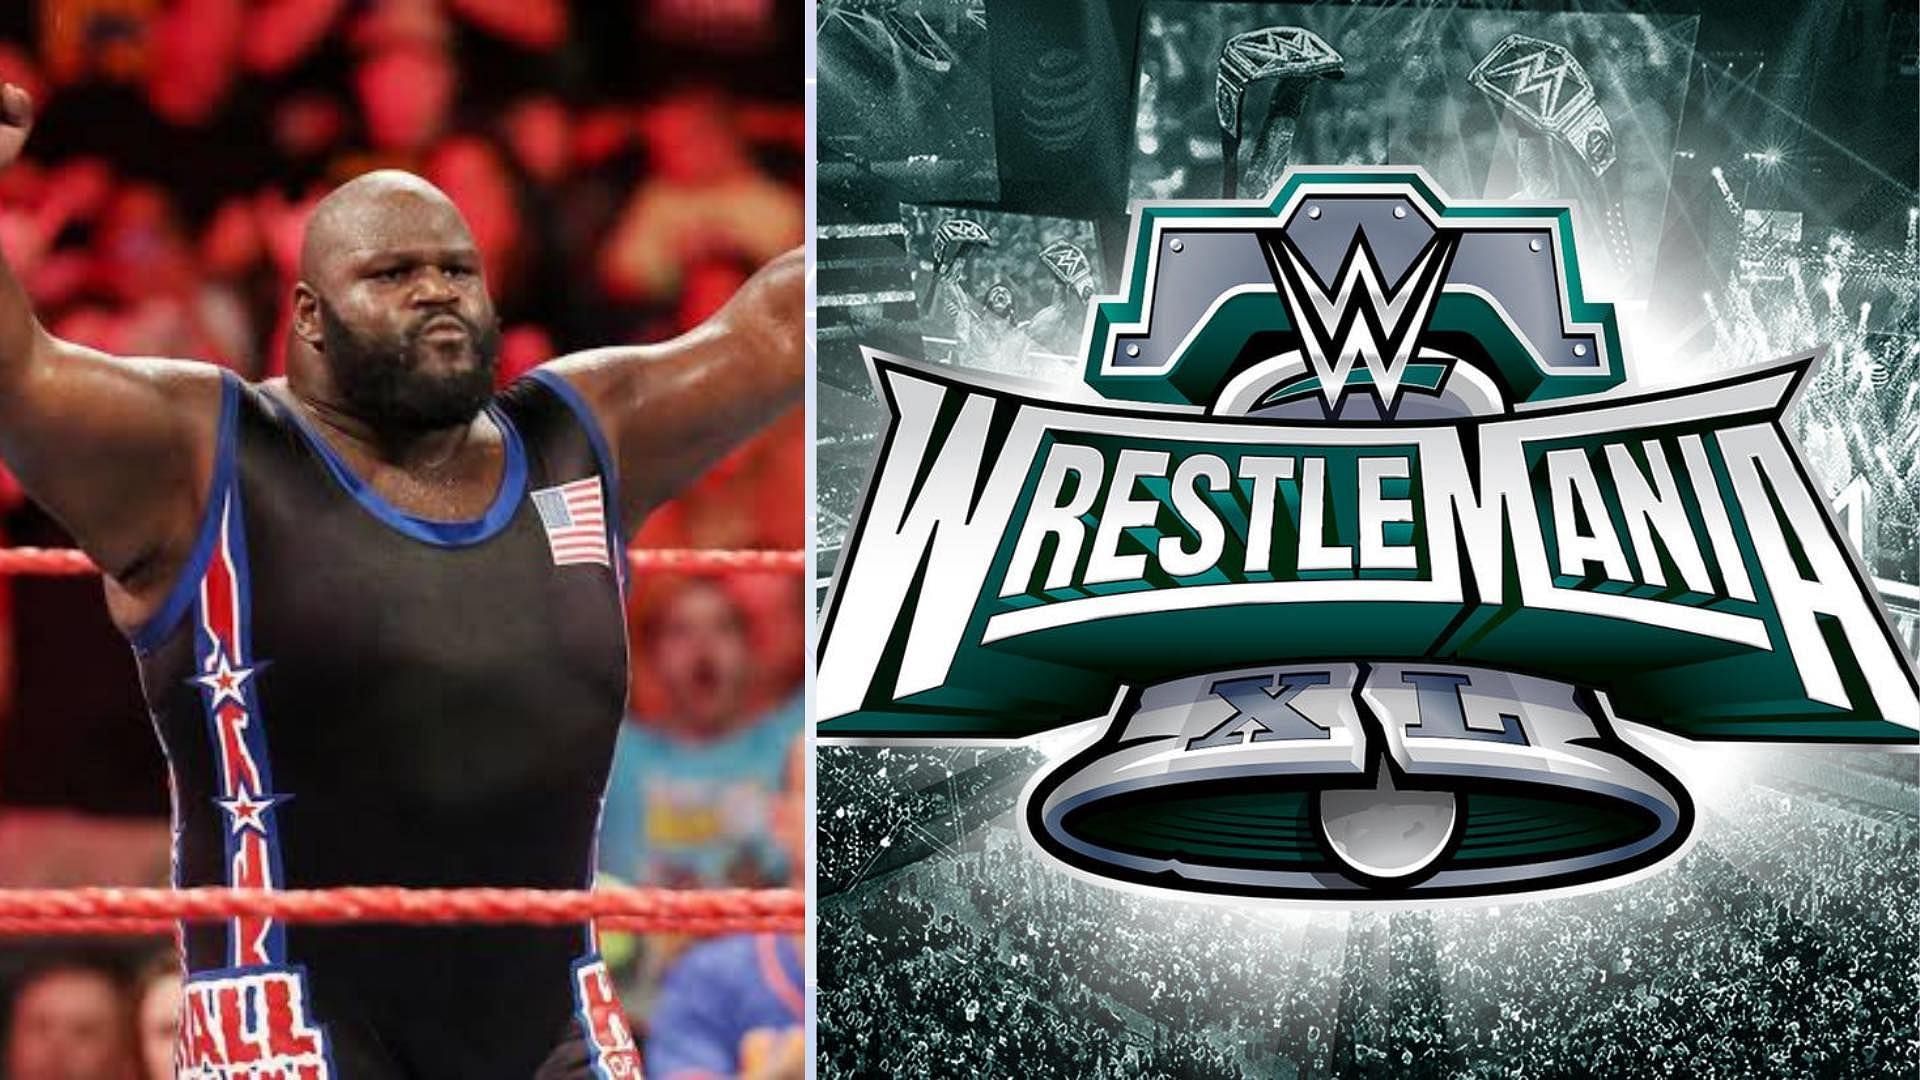 Mark Henry is a WWE Hall of Famer who is now signed with All Elite Wrestling [Photo courtesy of WWE Official Website]